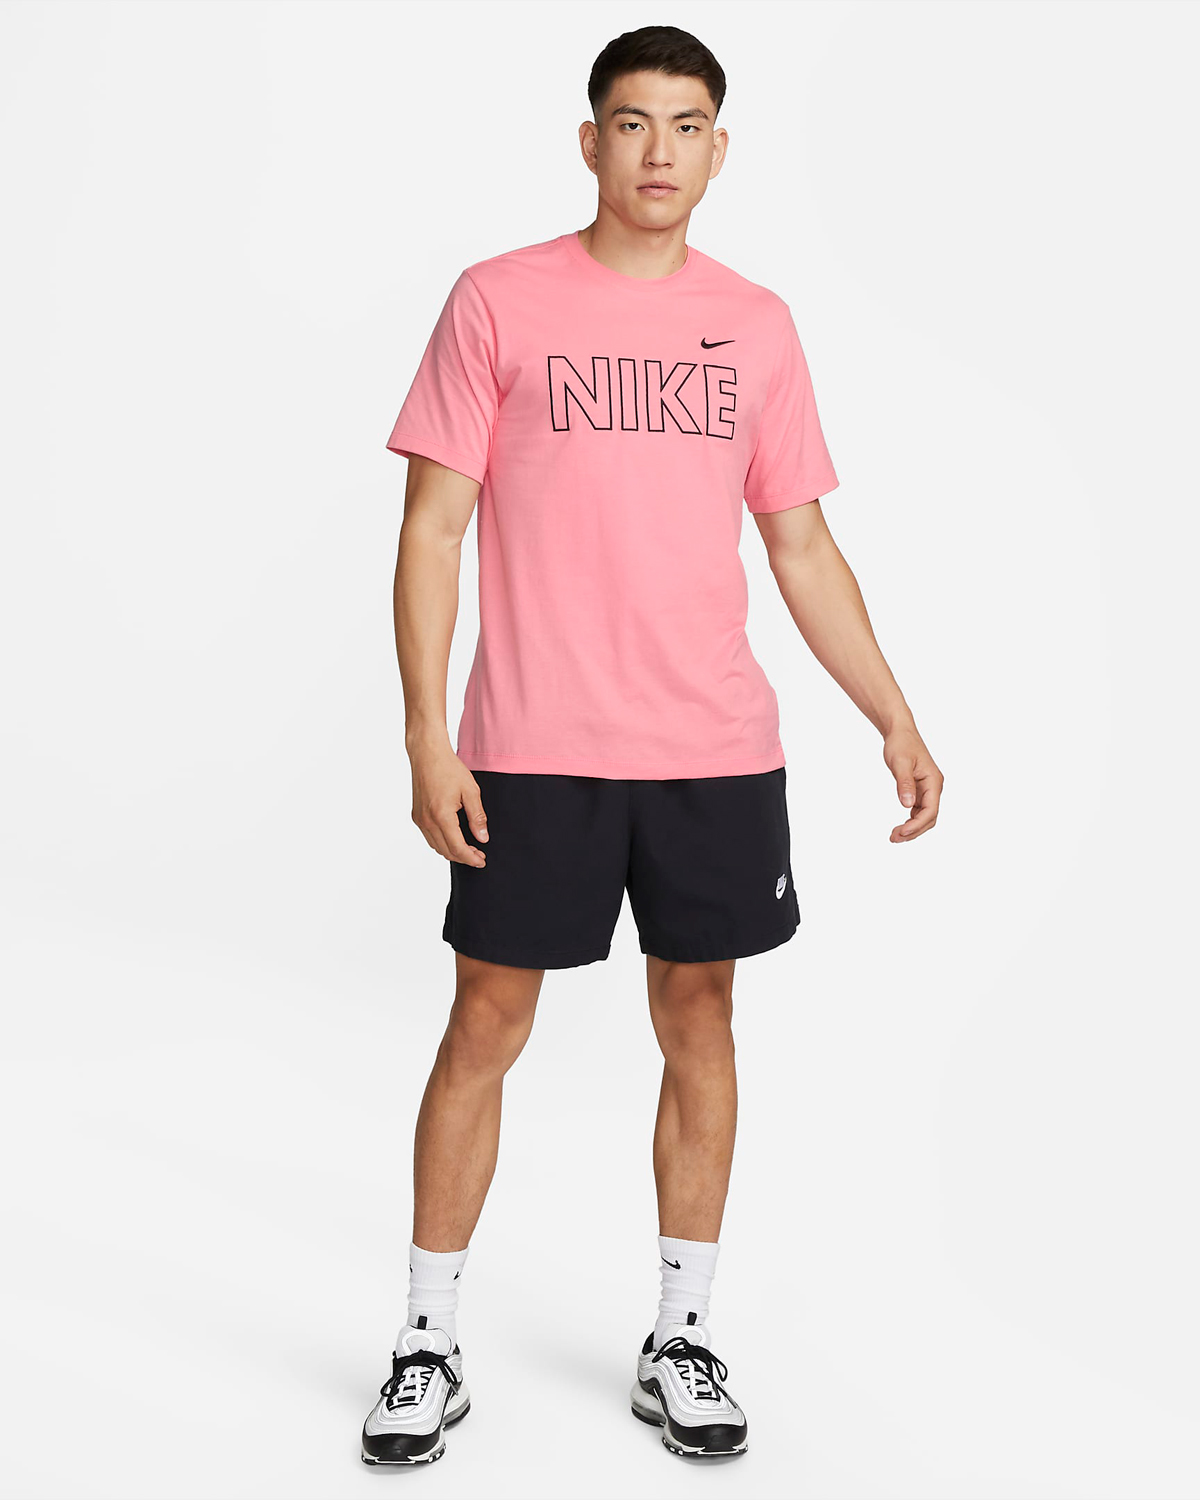 Nike Coral Chalk Shirts Shorts Clothing Sneaker Outfits